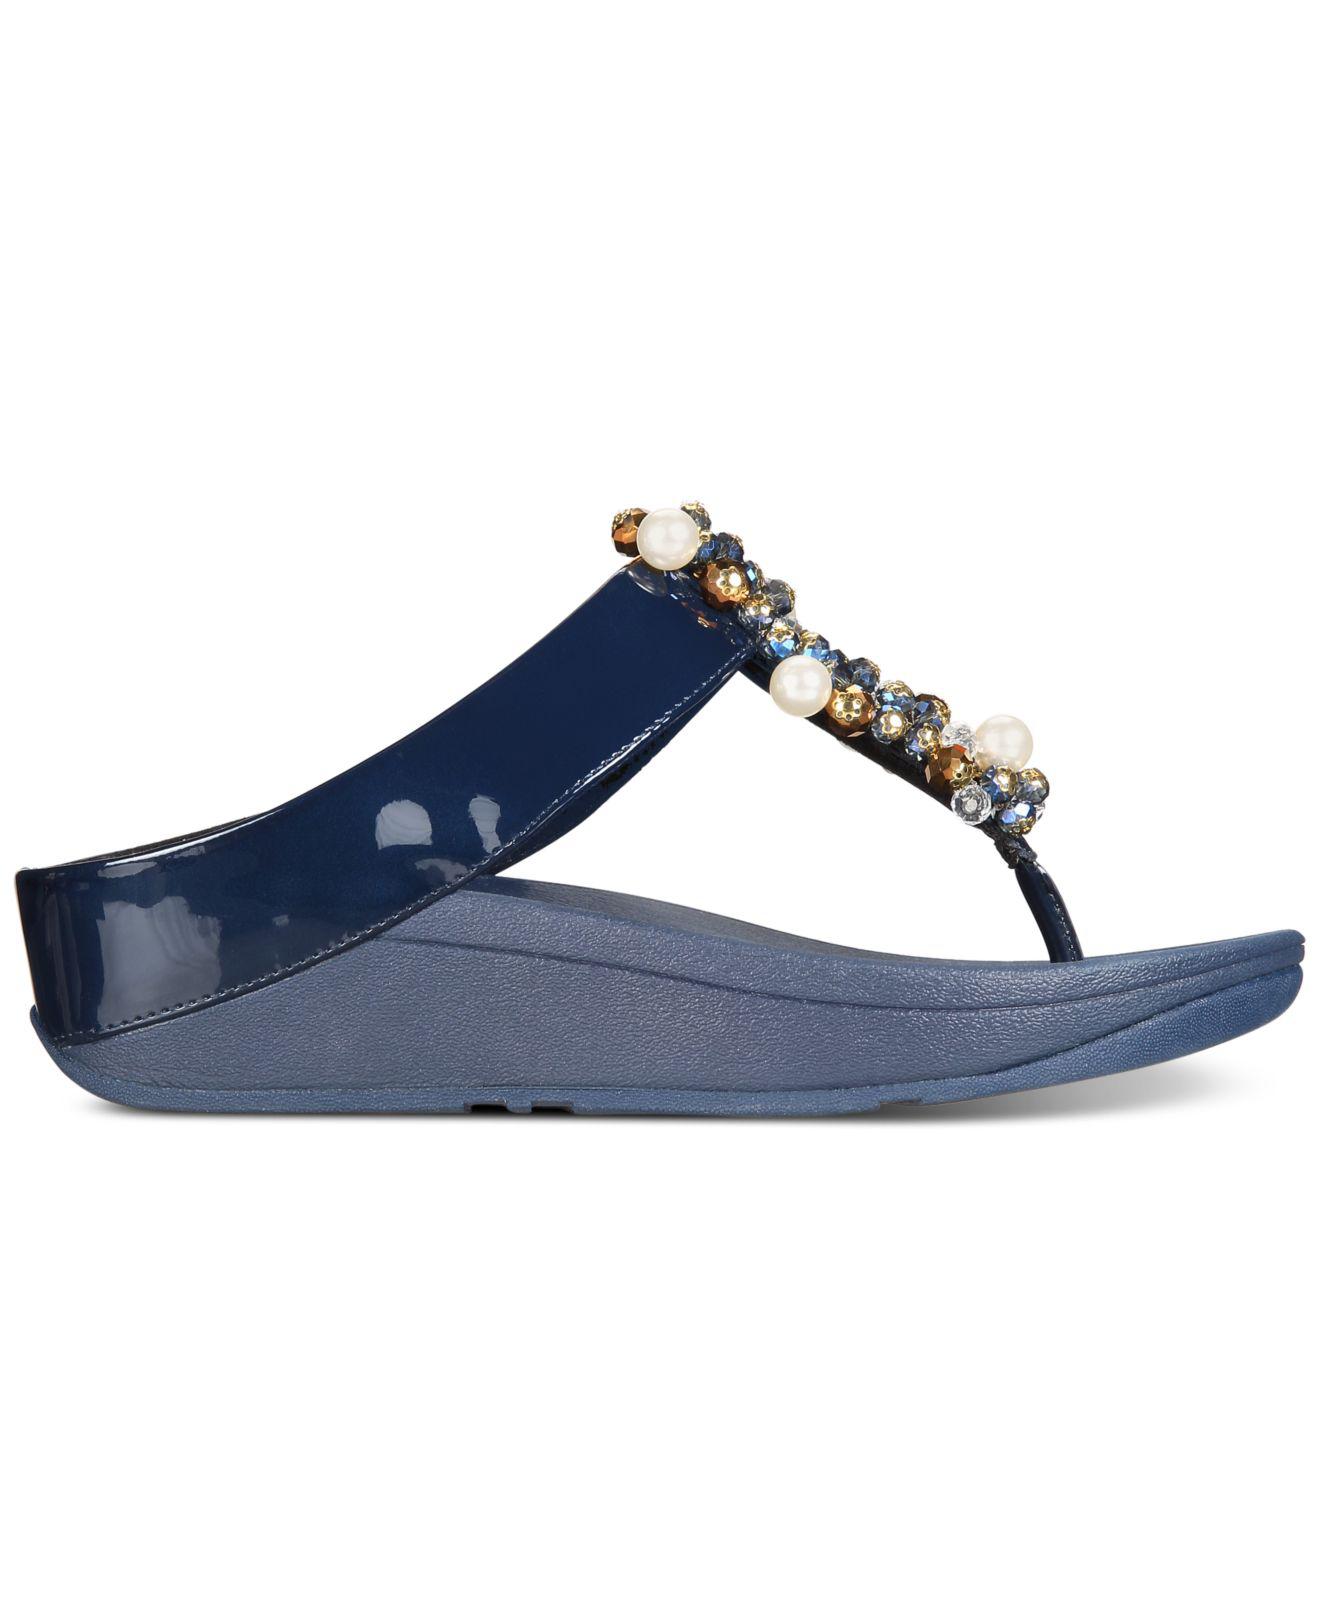 Fitflop Deco Flip-flop Sandals in Blue | Lyst